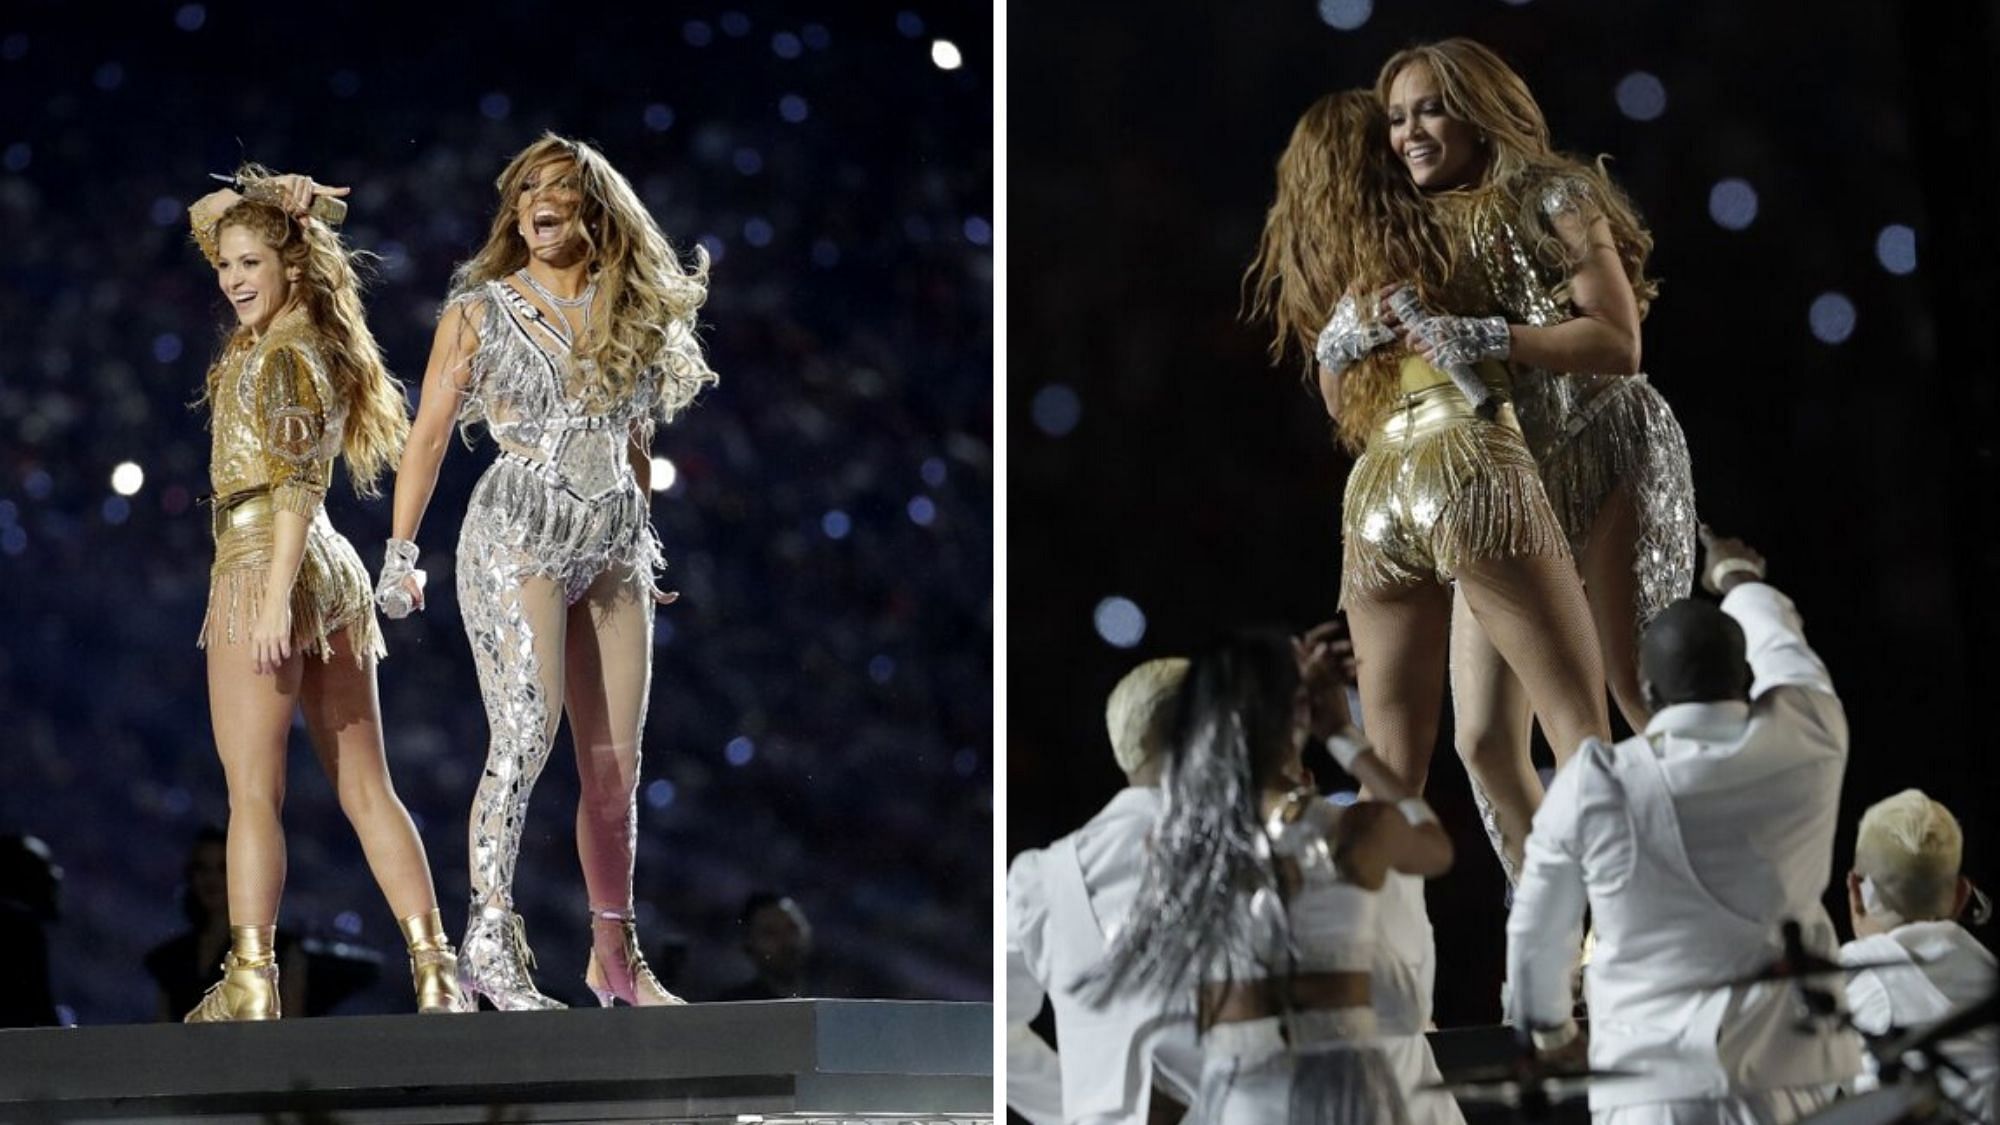 Shakira and Jennifer Lopez during their performance at the Super Bowl Half Time Show in Miami. 